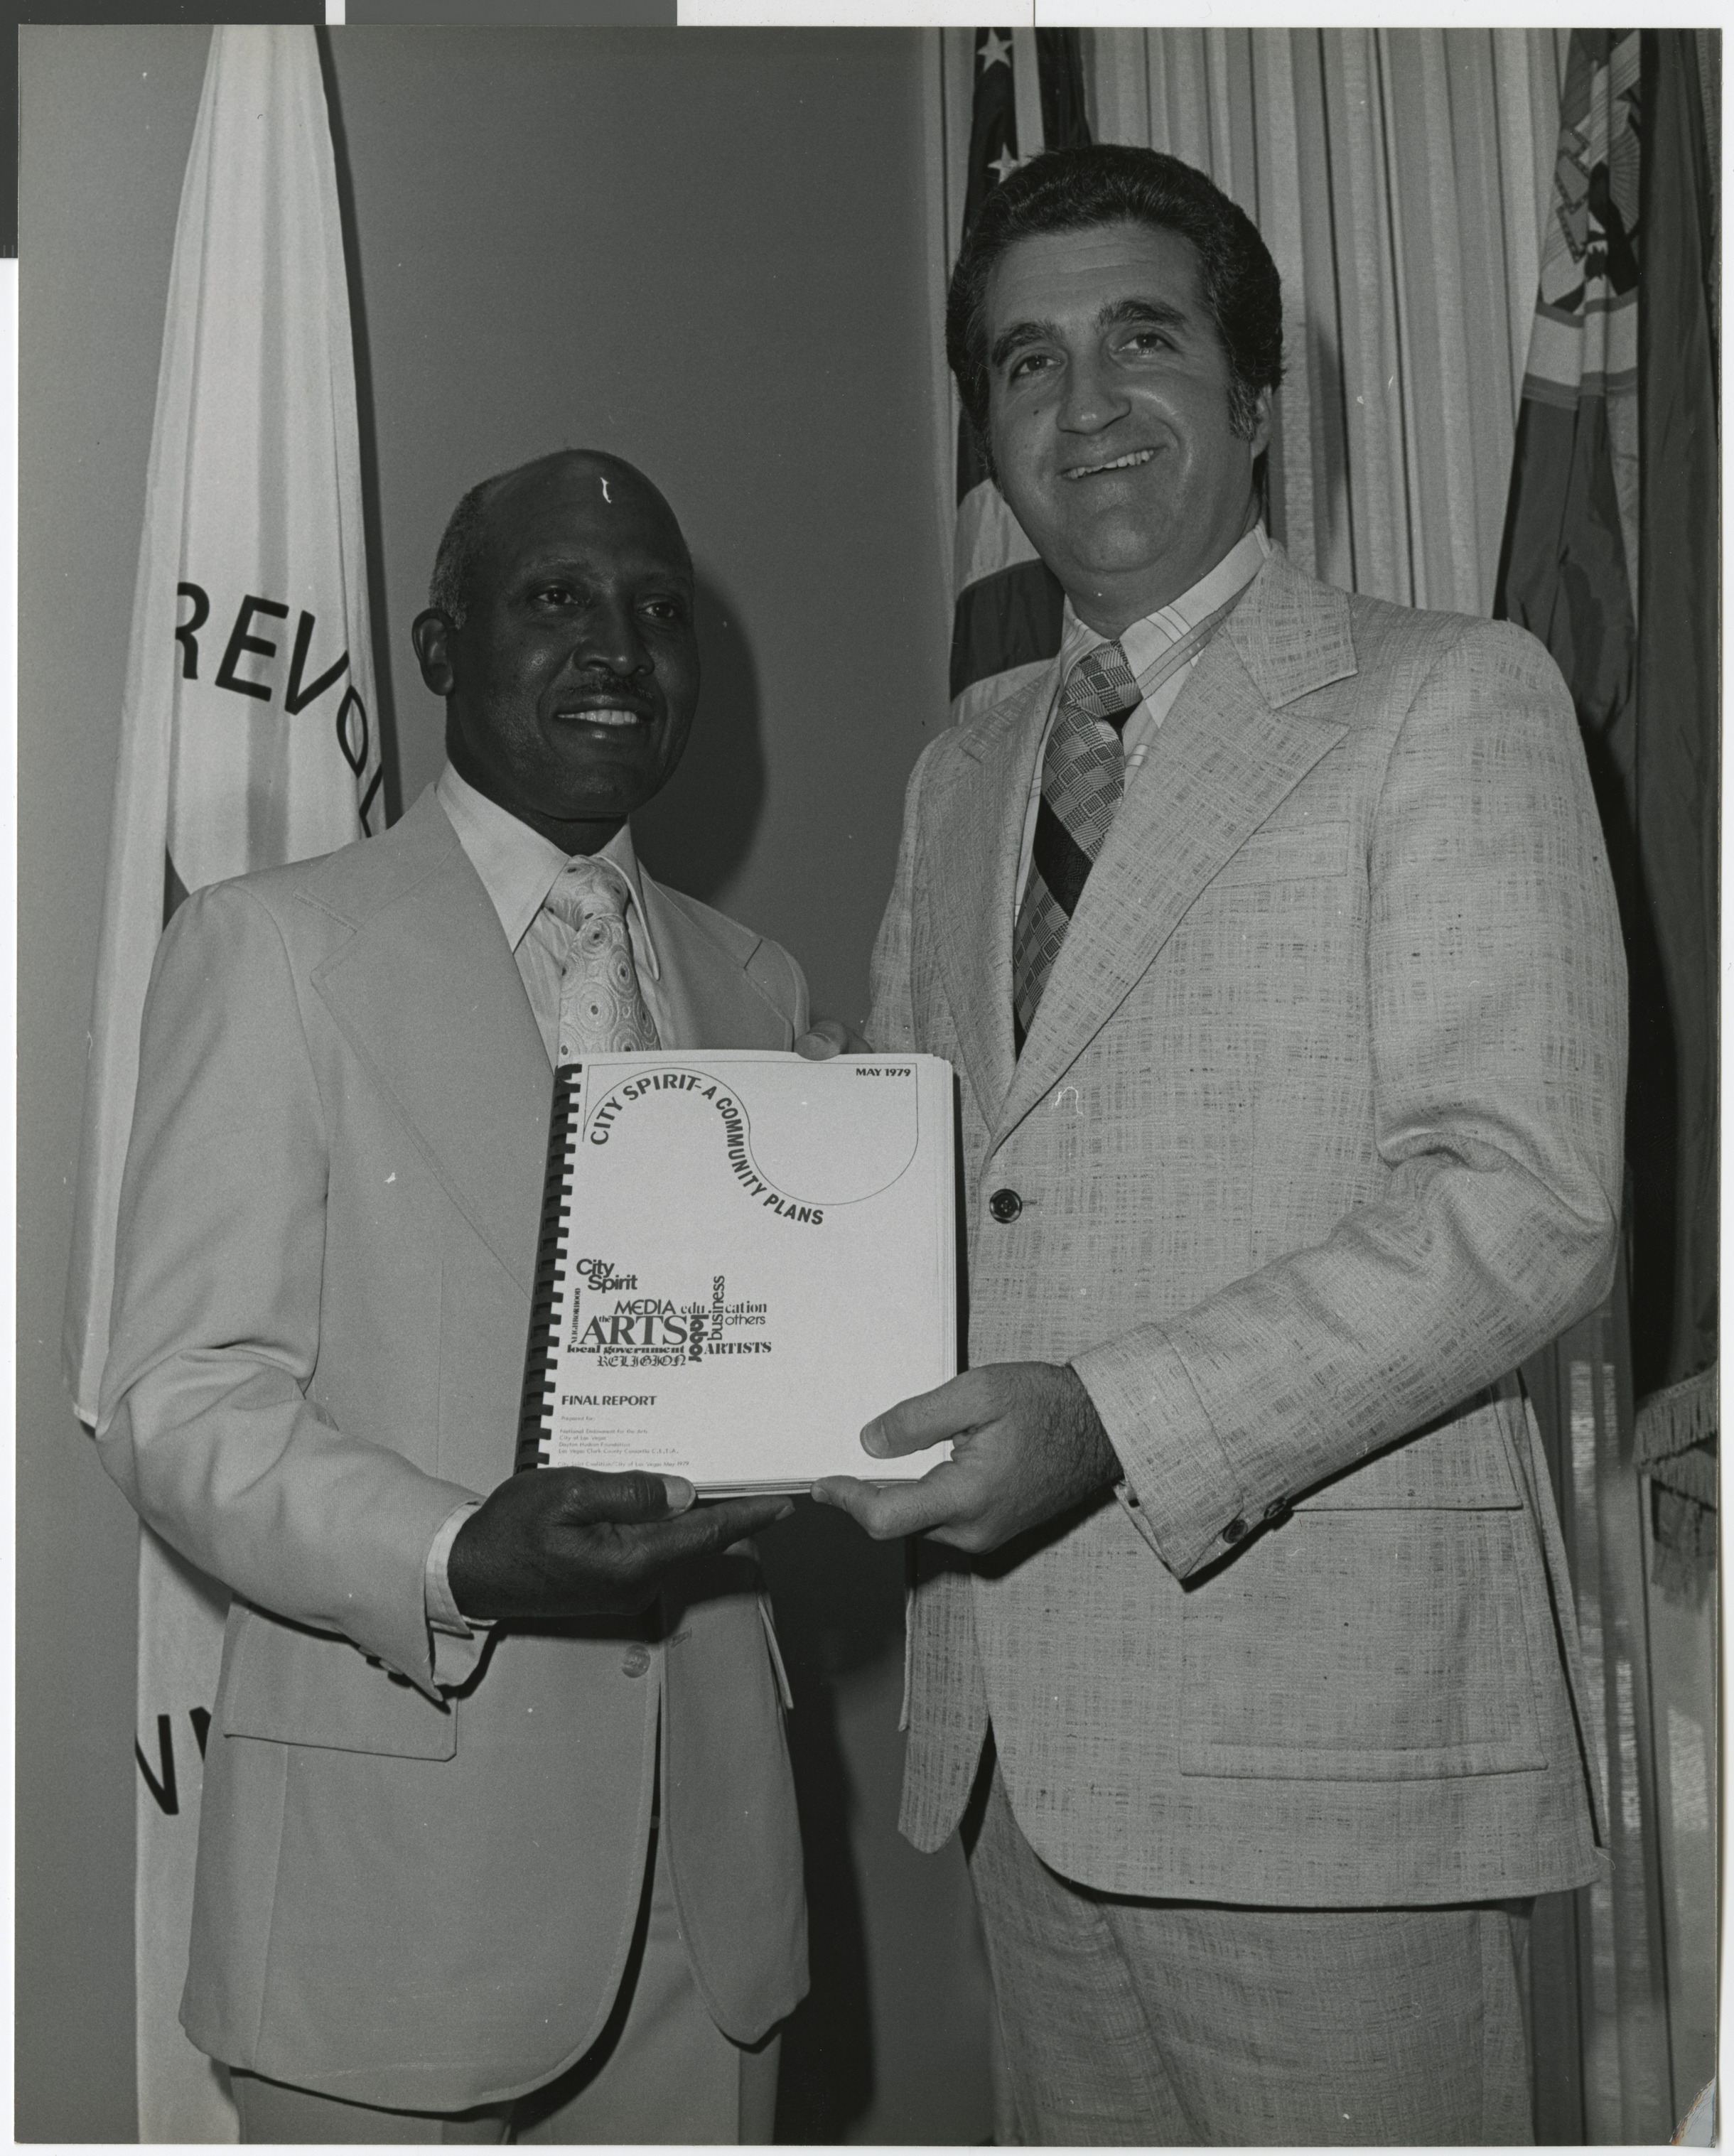 Photograph of Woodrow Wilson and Ron Lurie holding a City Spirit report, May 1979